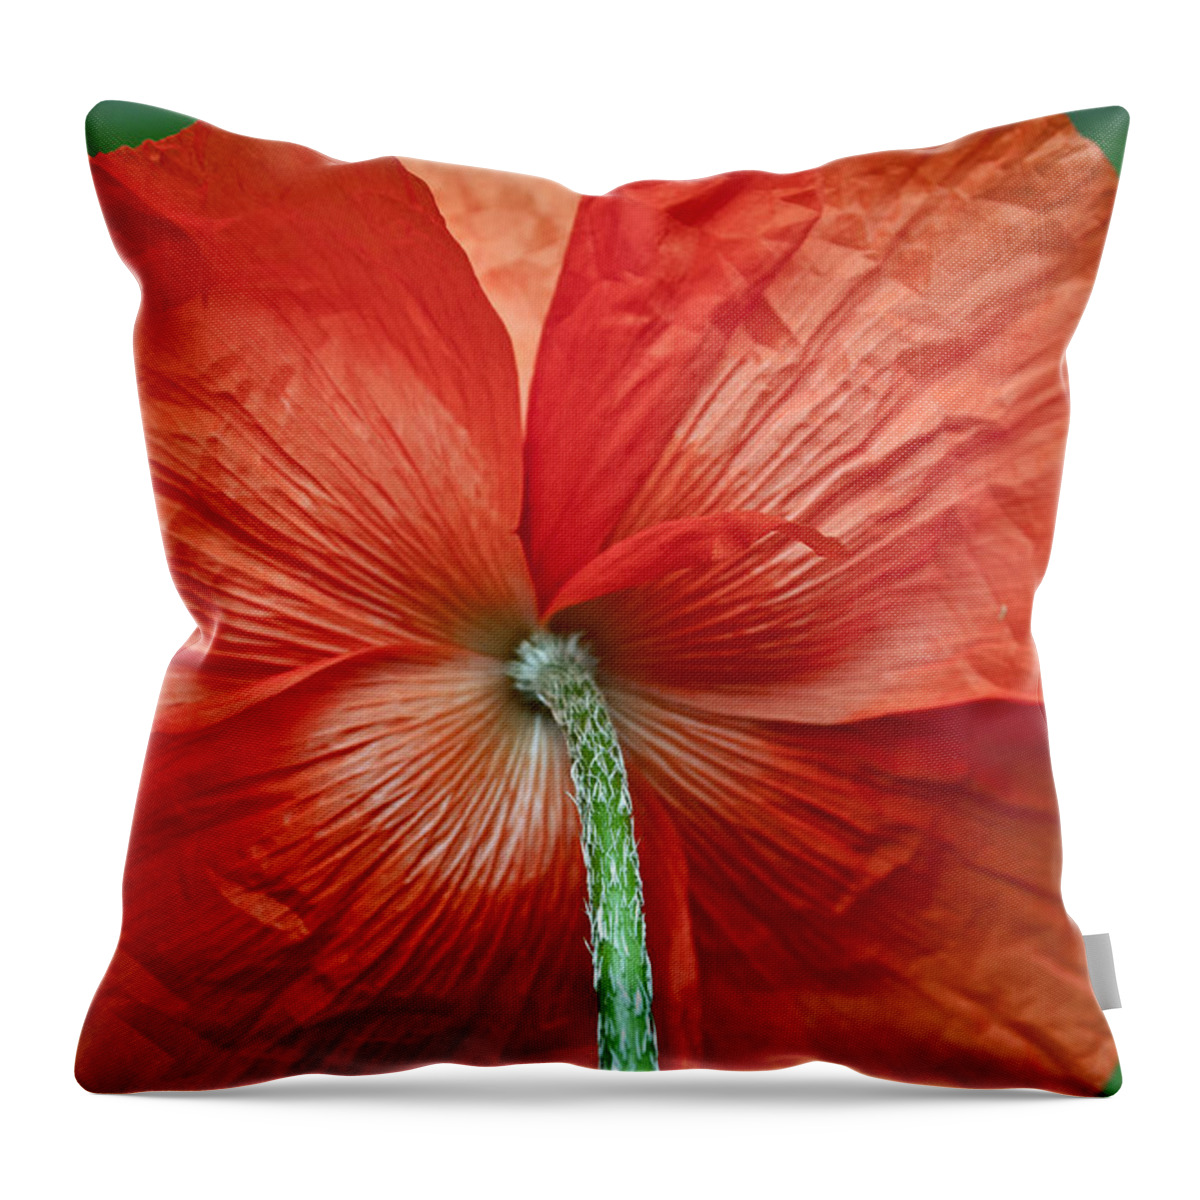 Poppy Throw Pillow featuring the photograph Veterans Day Remembrance by Tikvah's Hope